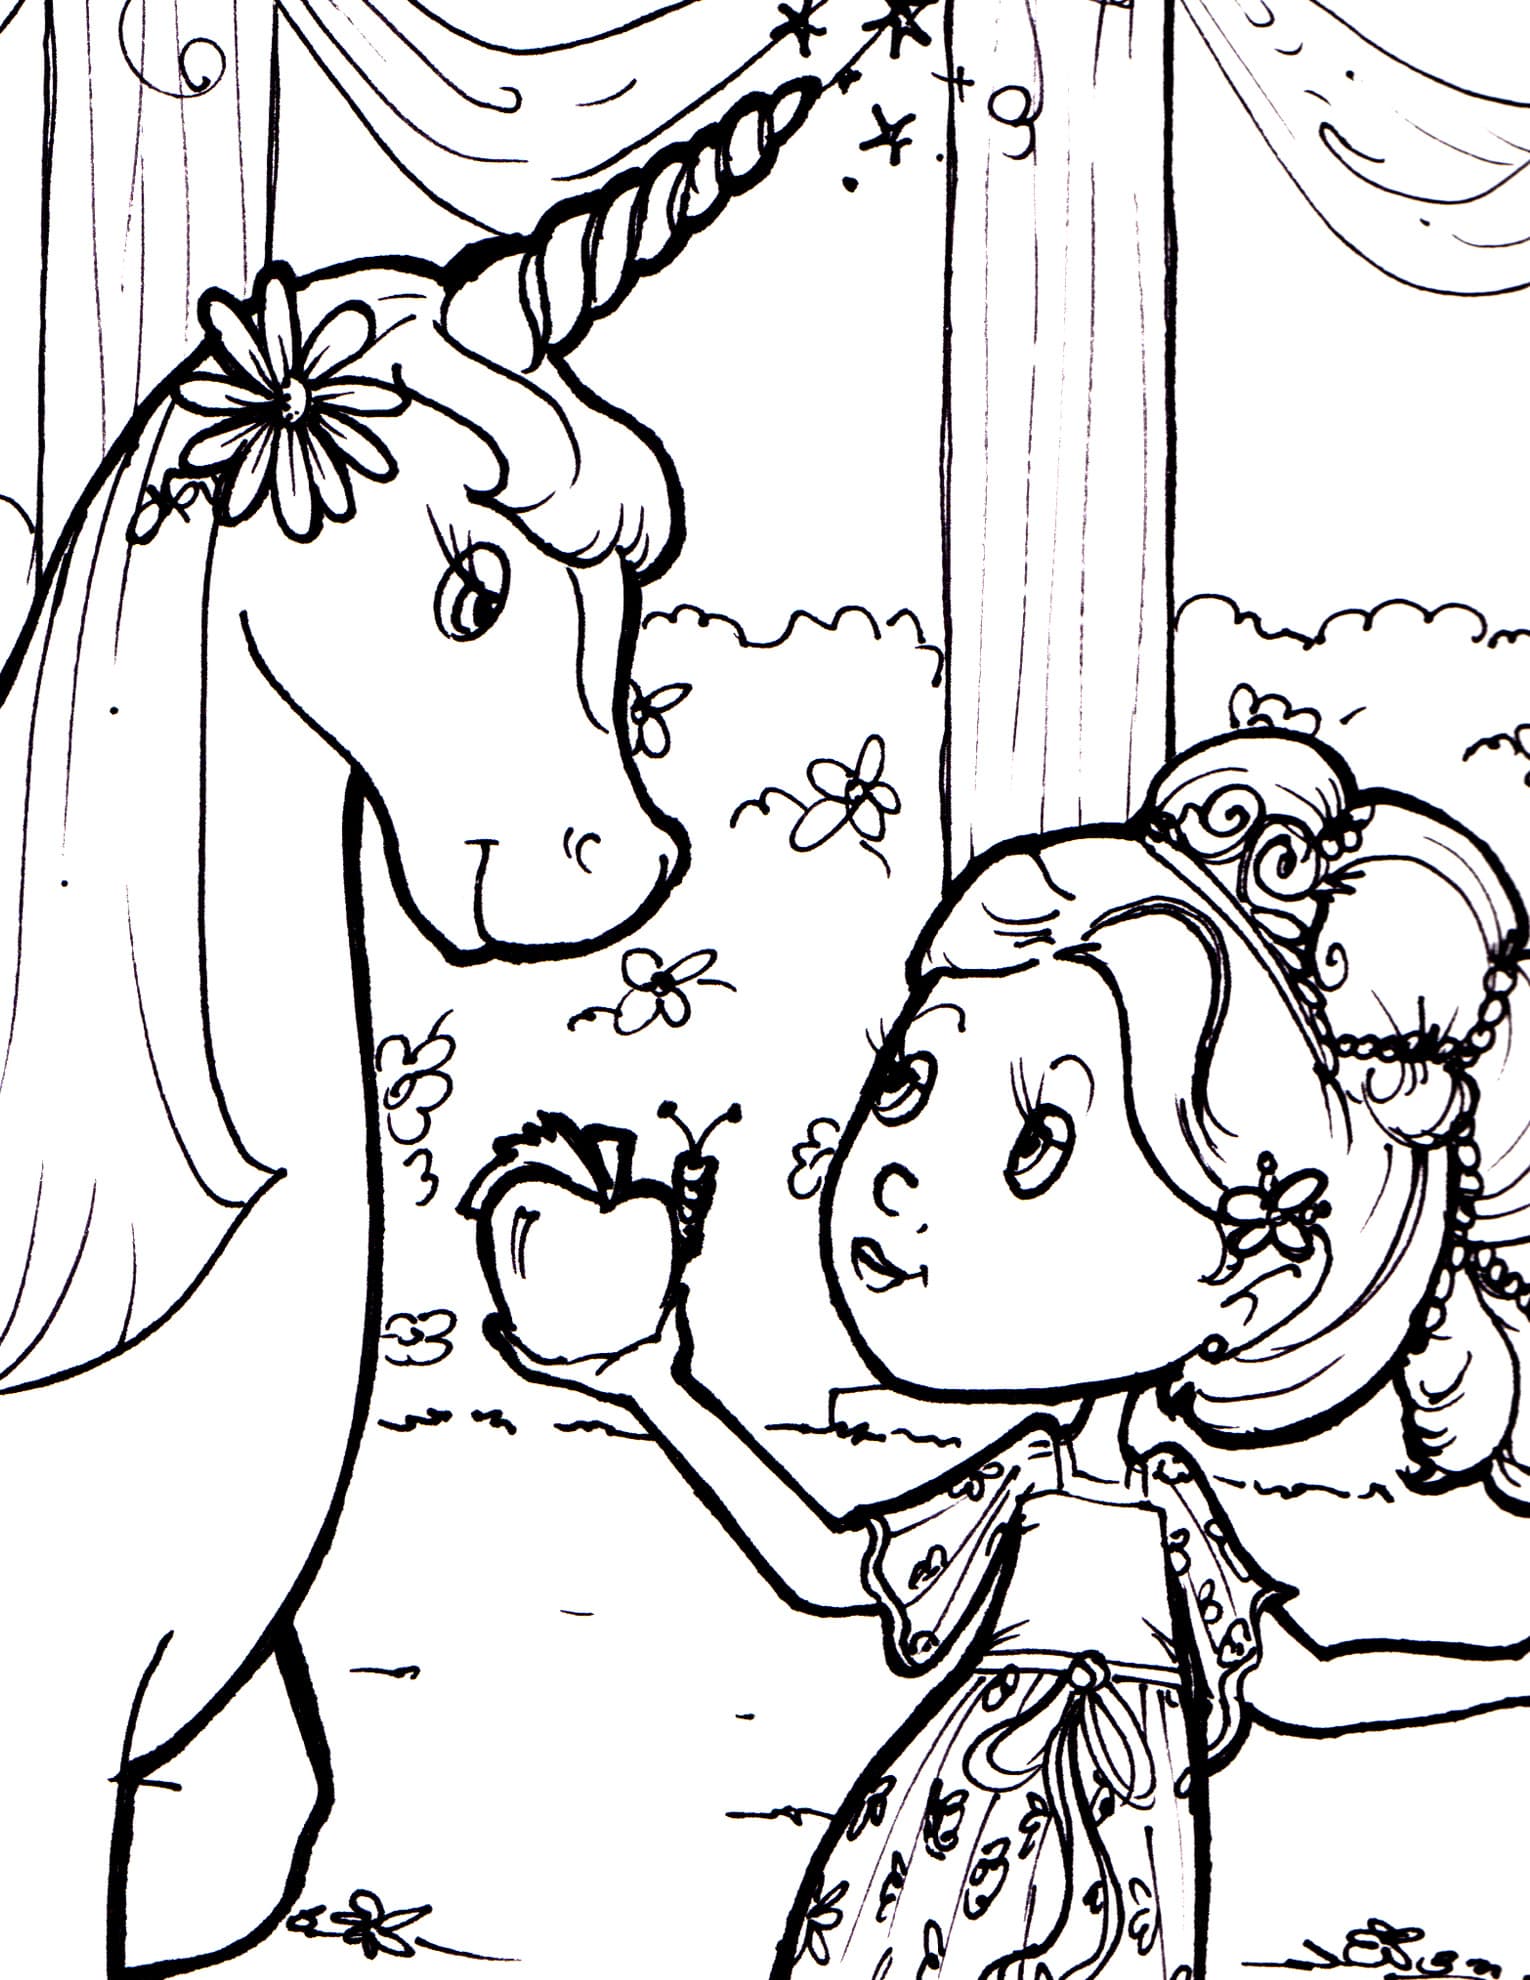 Unicorn Coloring Pages, 100 Black and White Pictures. Print ThemOnline!